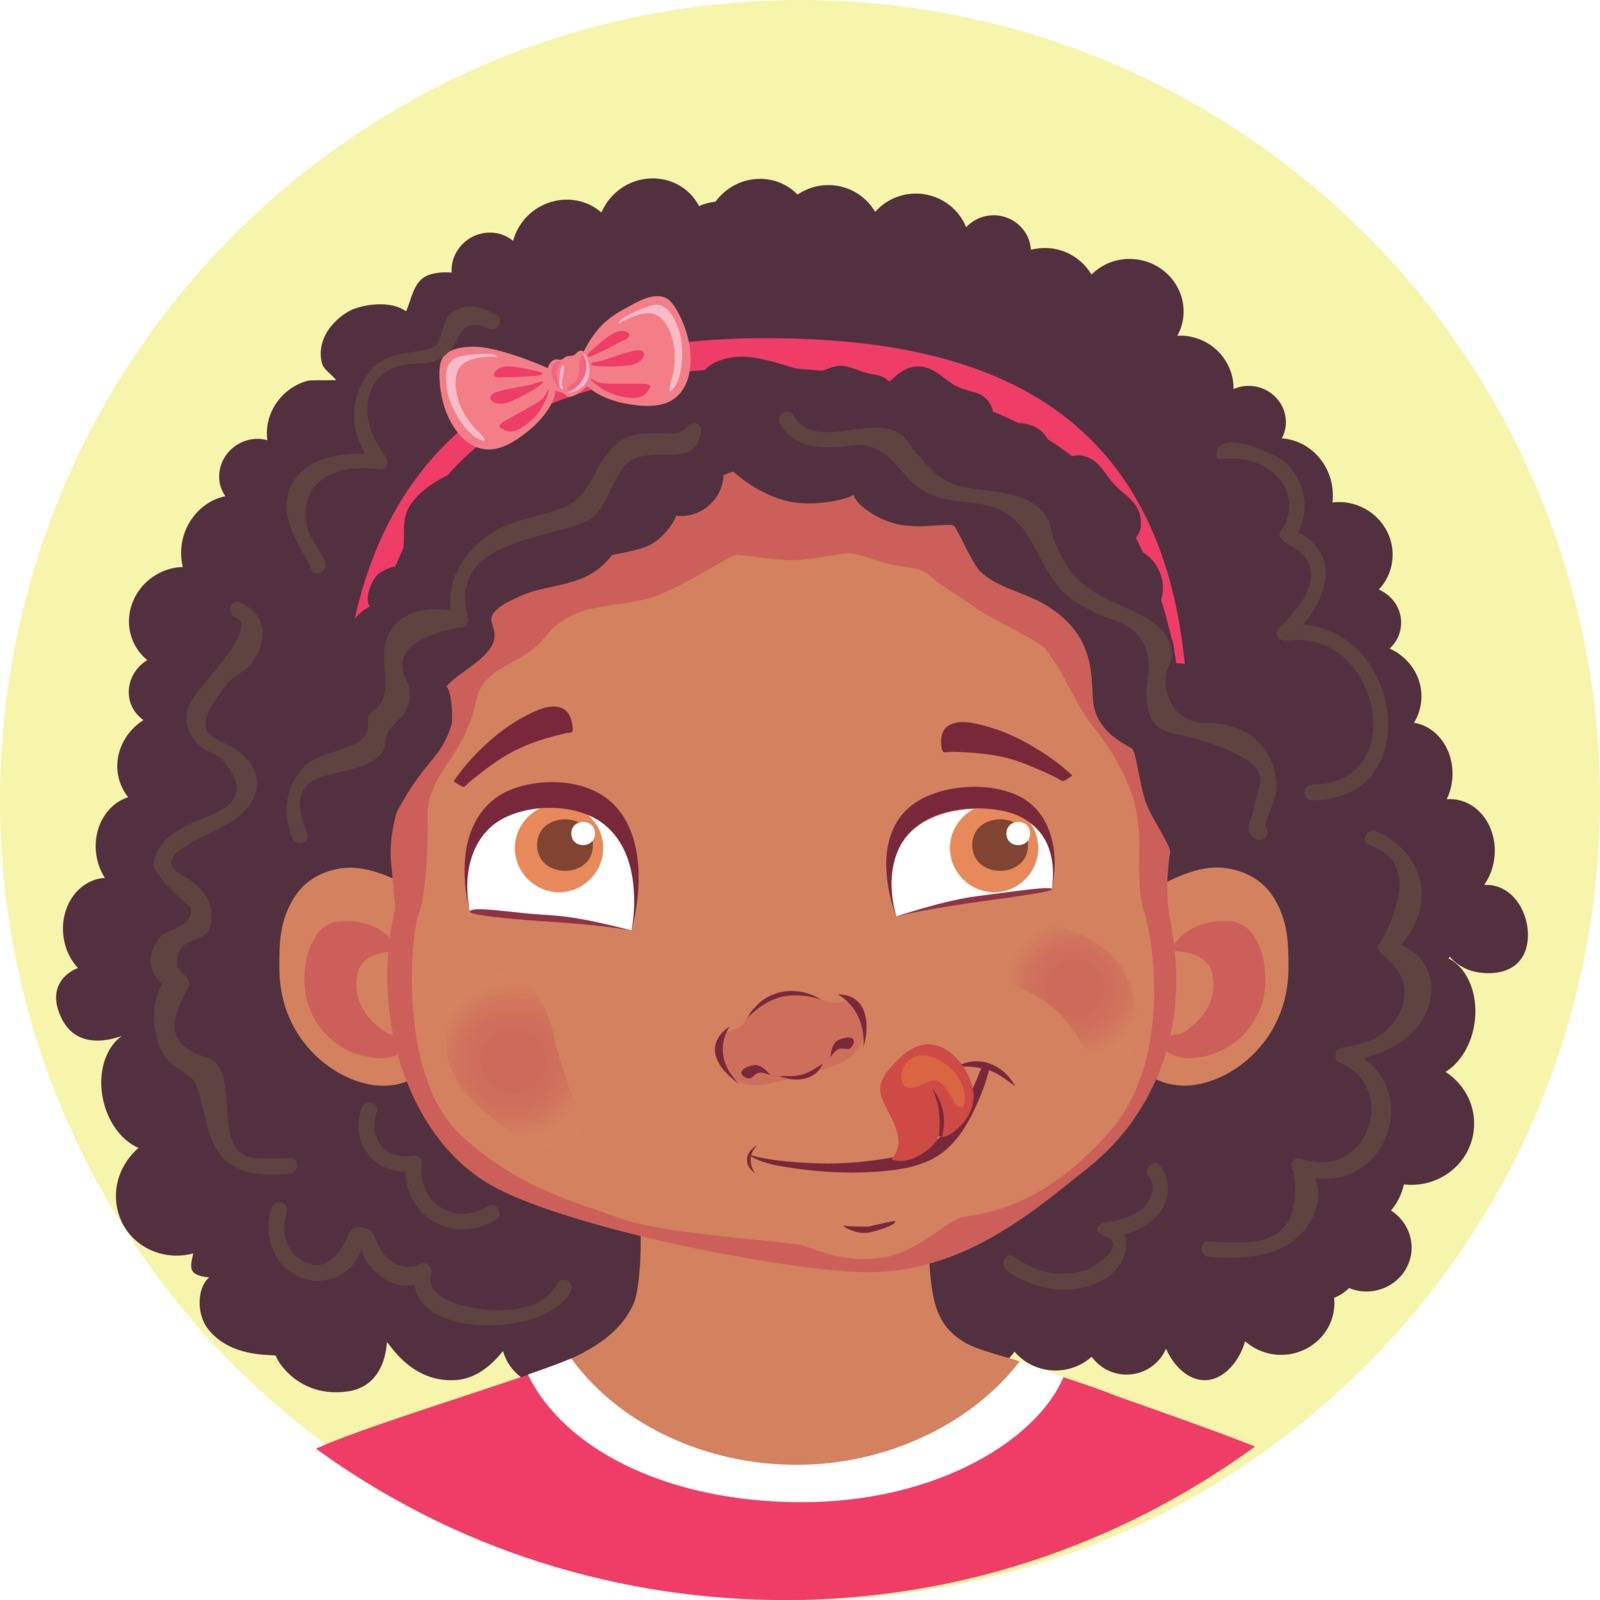 African girls emotions. Facial expression. Set of emoticons. Flat vector illustration. Yum